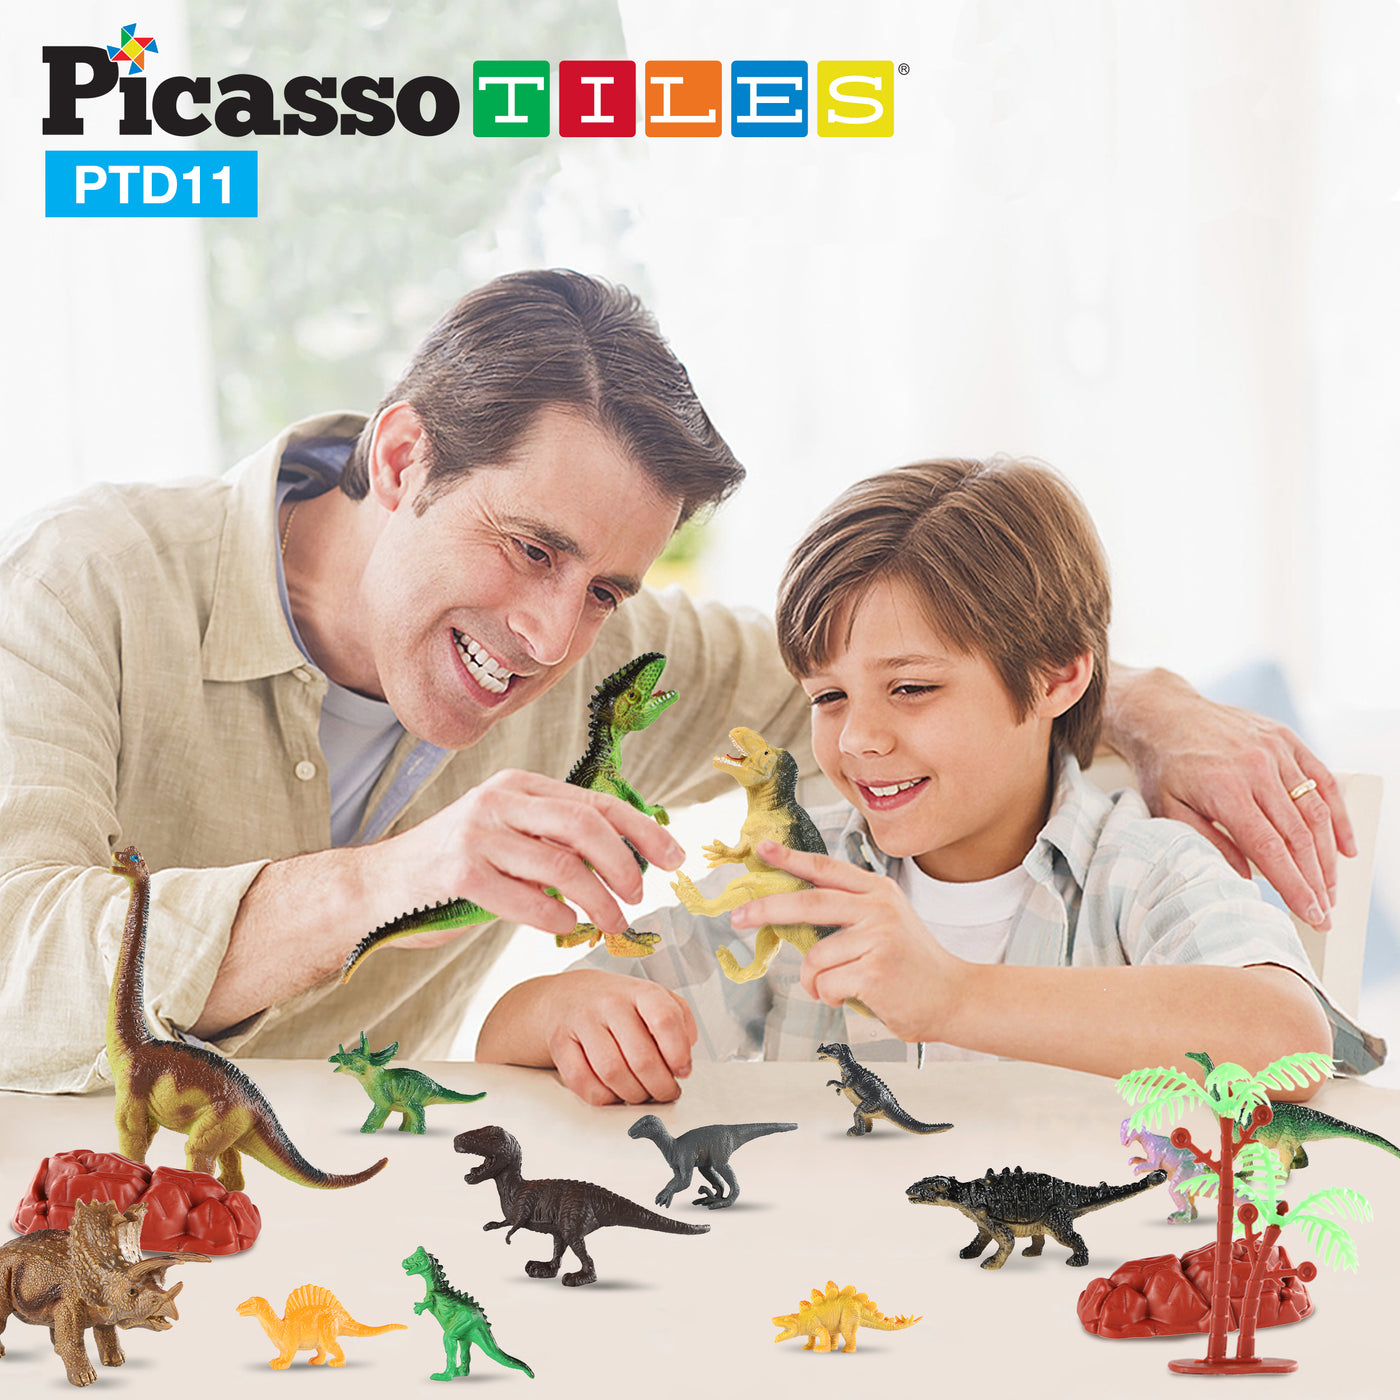 PicassoTiles 32pcs Dinosaur Action Figures with Prehistoric Activity Play Mat